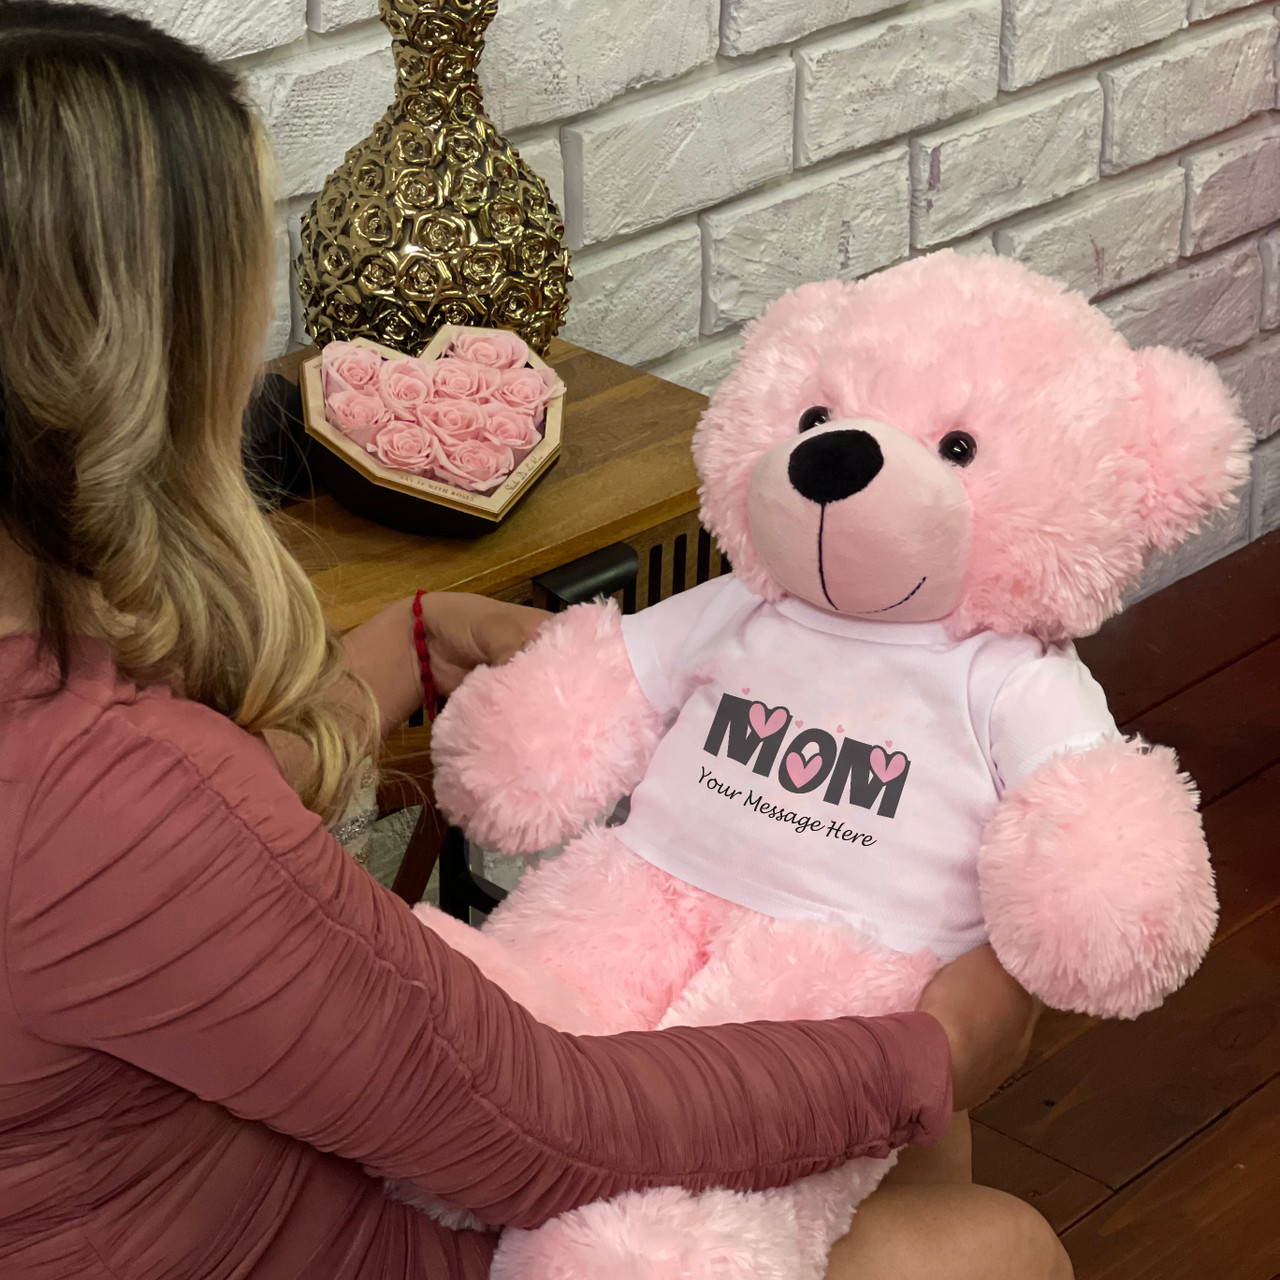 Mother's Day Personalized Teddy Bear Gift with Rose - Giant Teddy